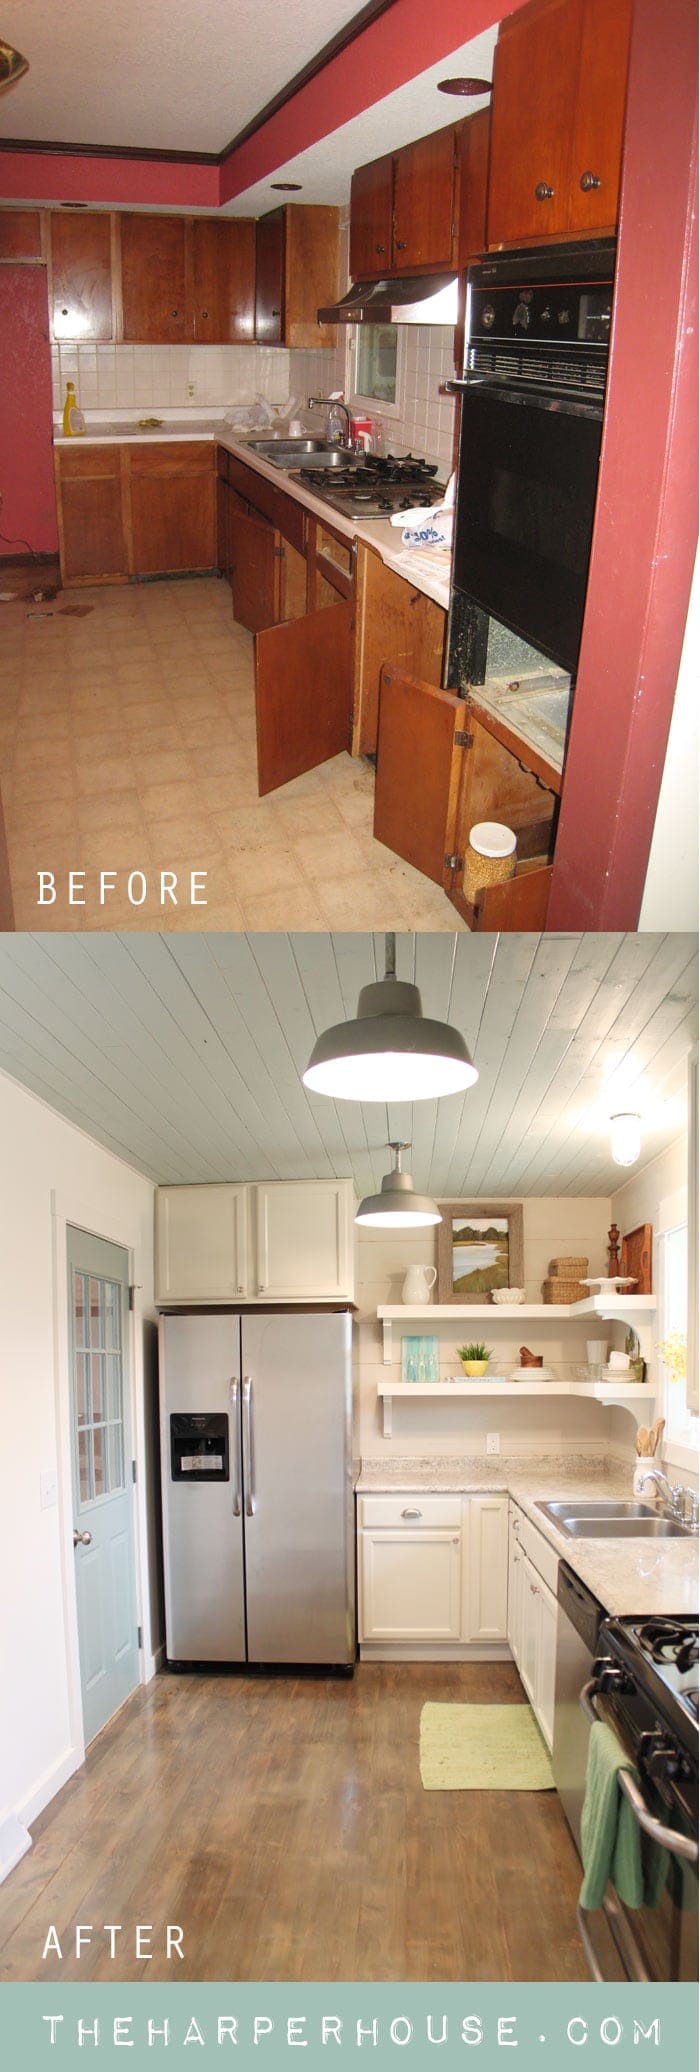 This ugly kitchen was completely transformed for under $5k |The Harper House